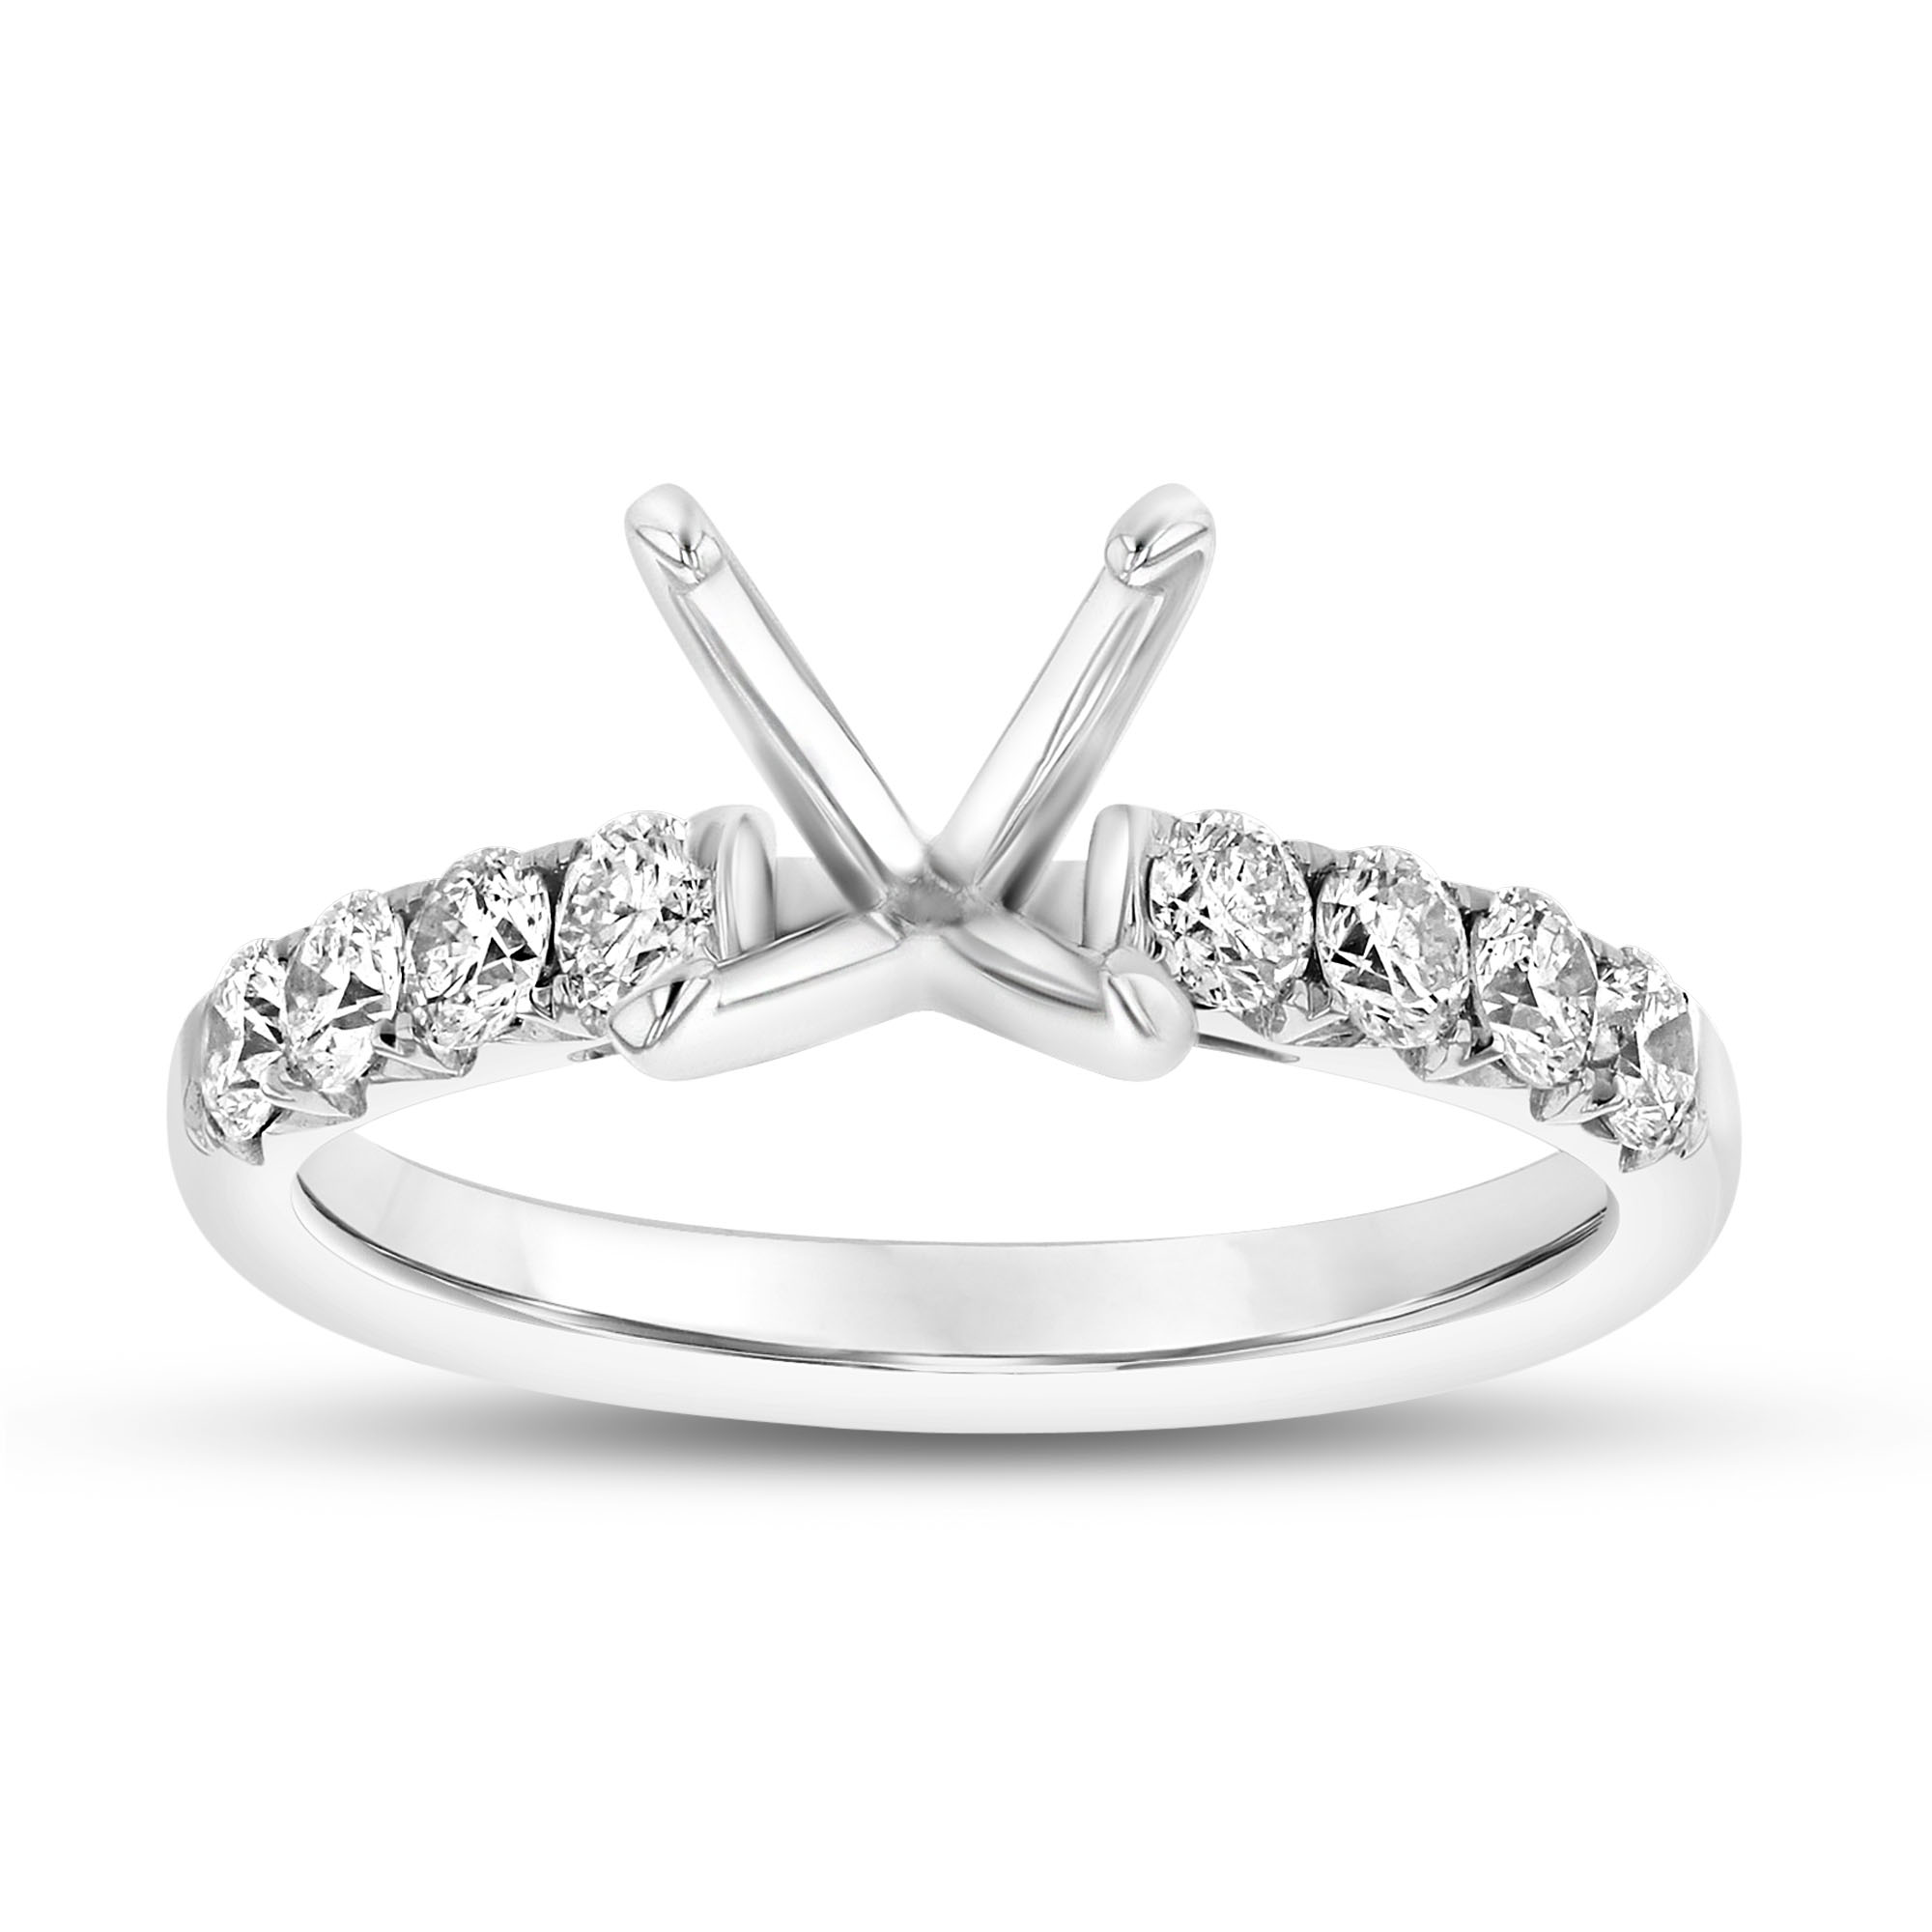 View 0.60ctw Diamond Semi Mount Engagement Ring in 18k White Gold